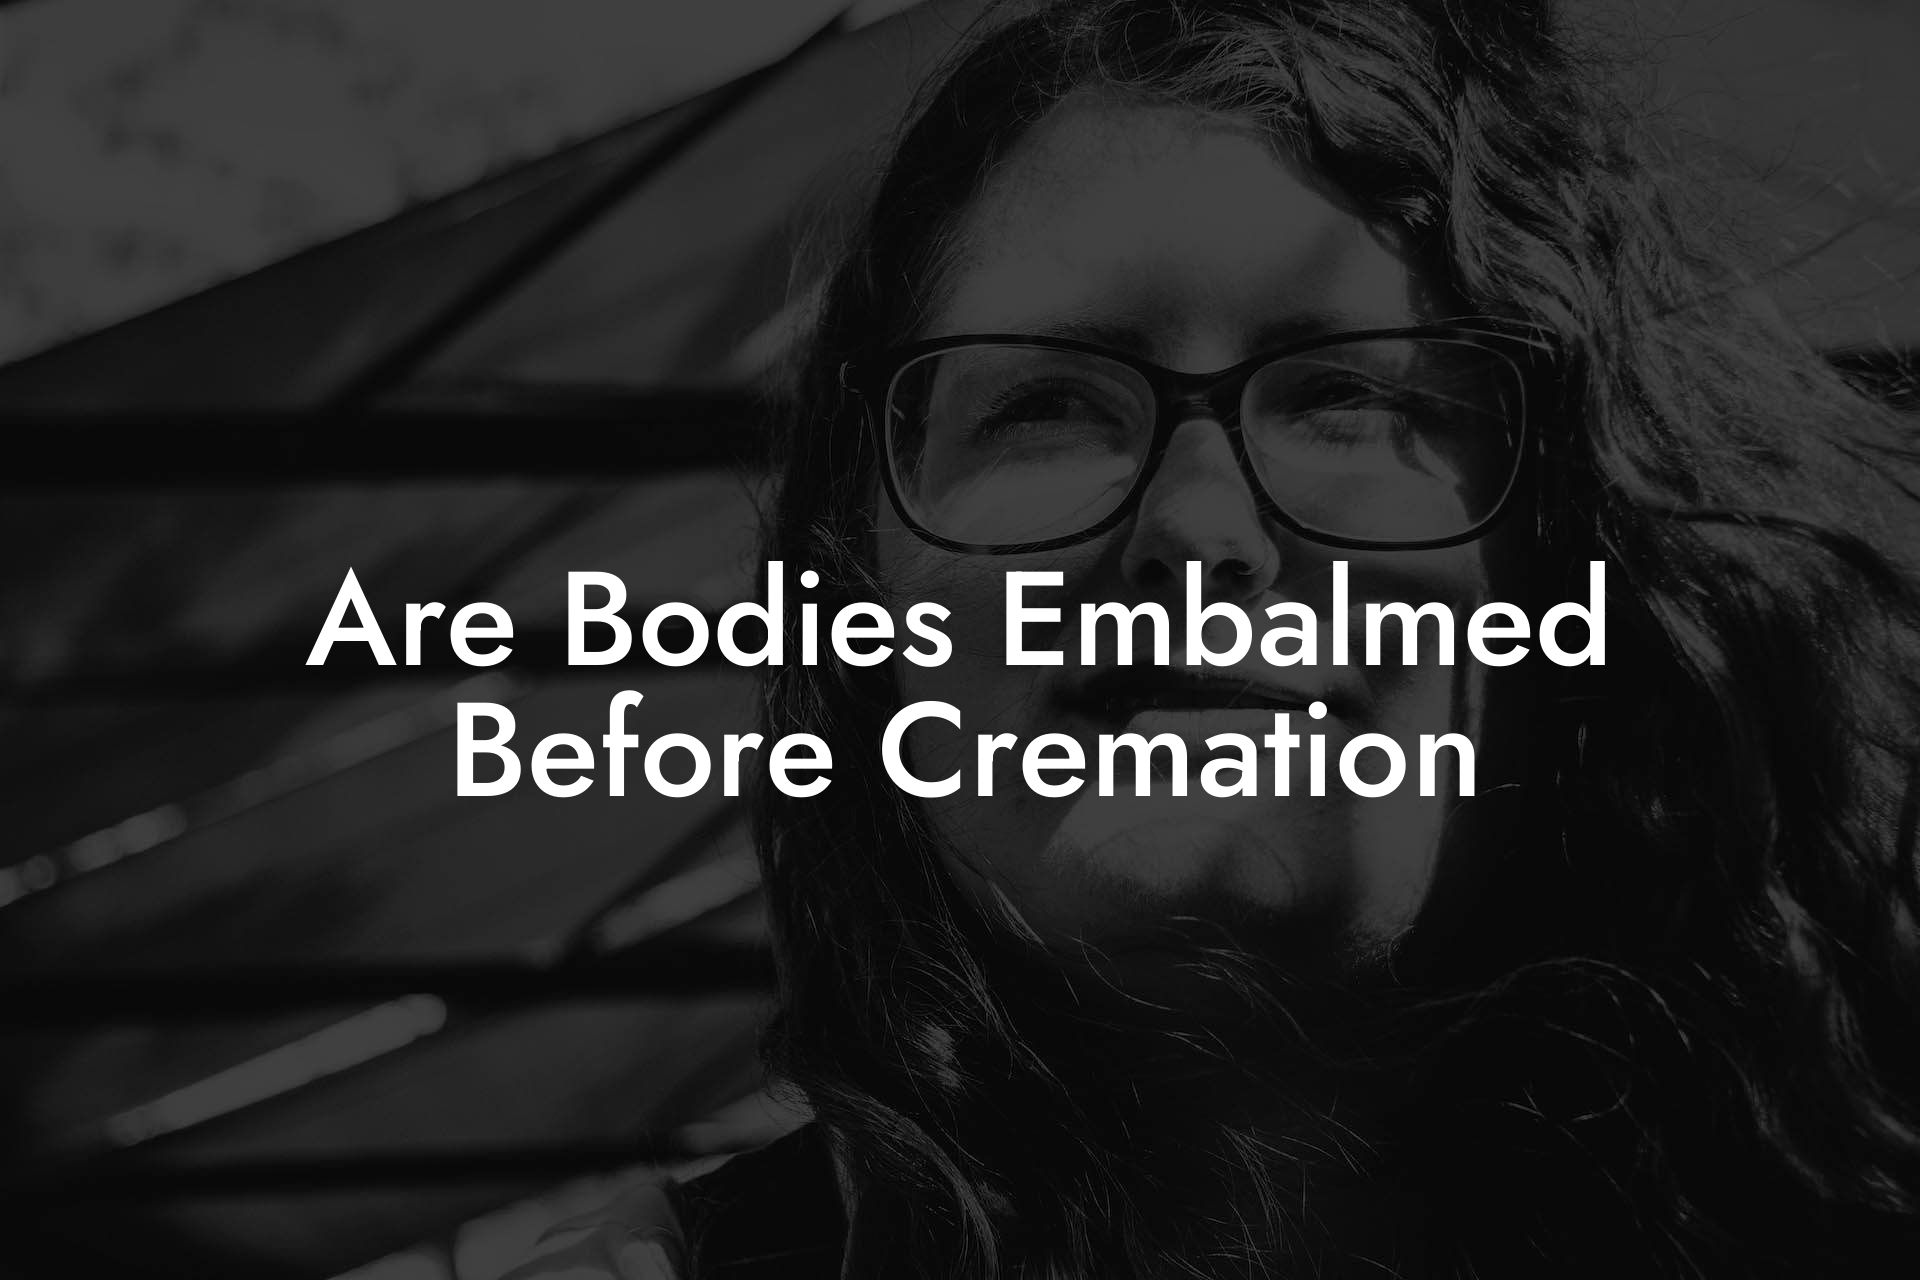 Are Bodies Embalmed Before Cremation